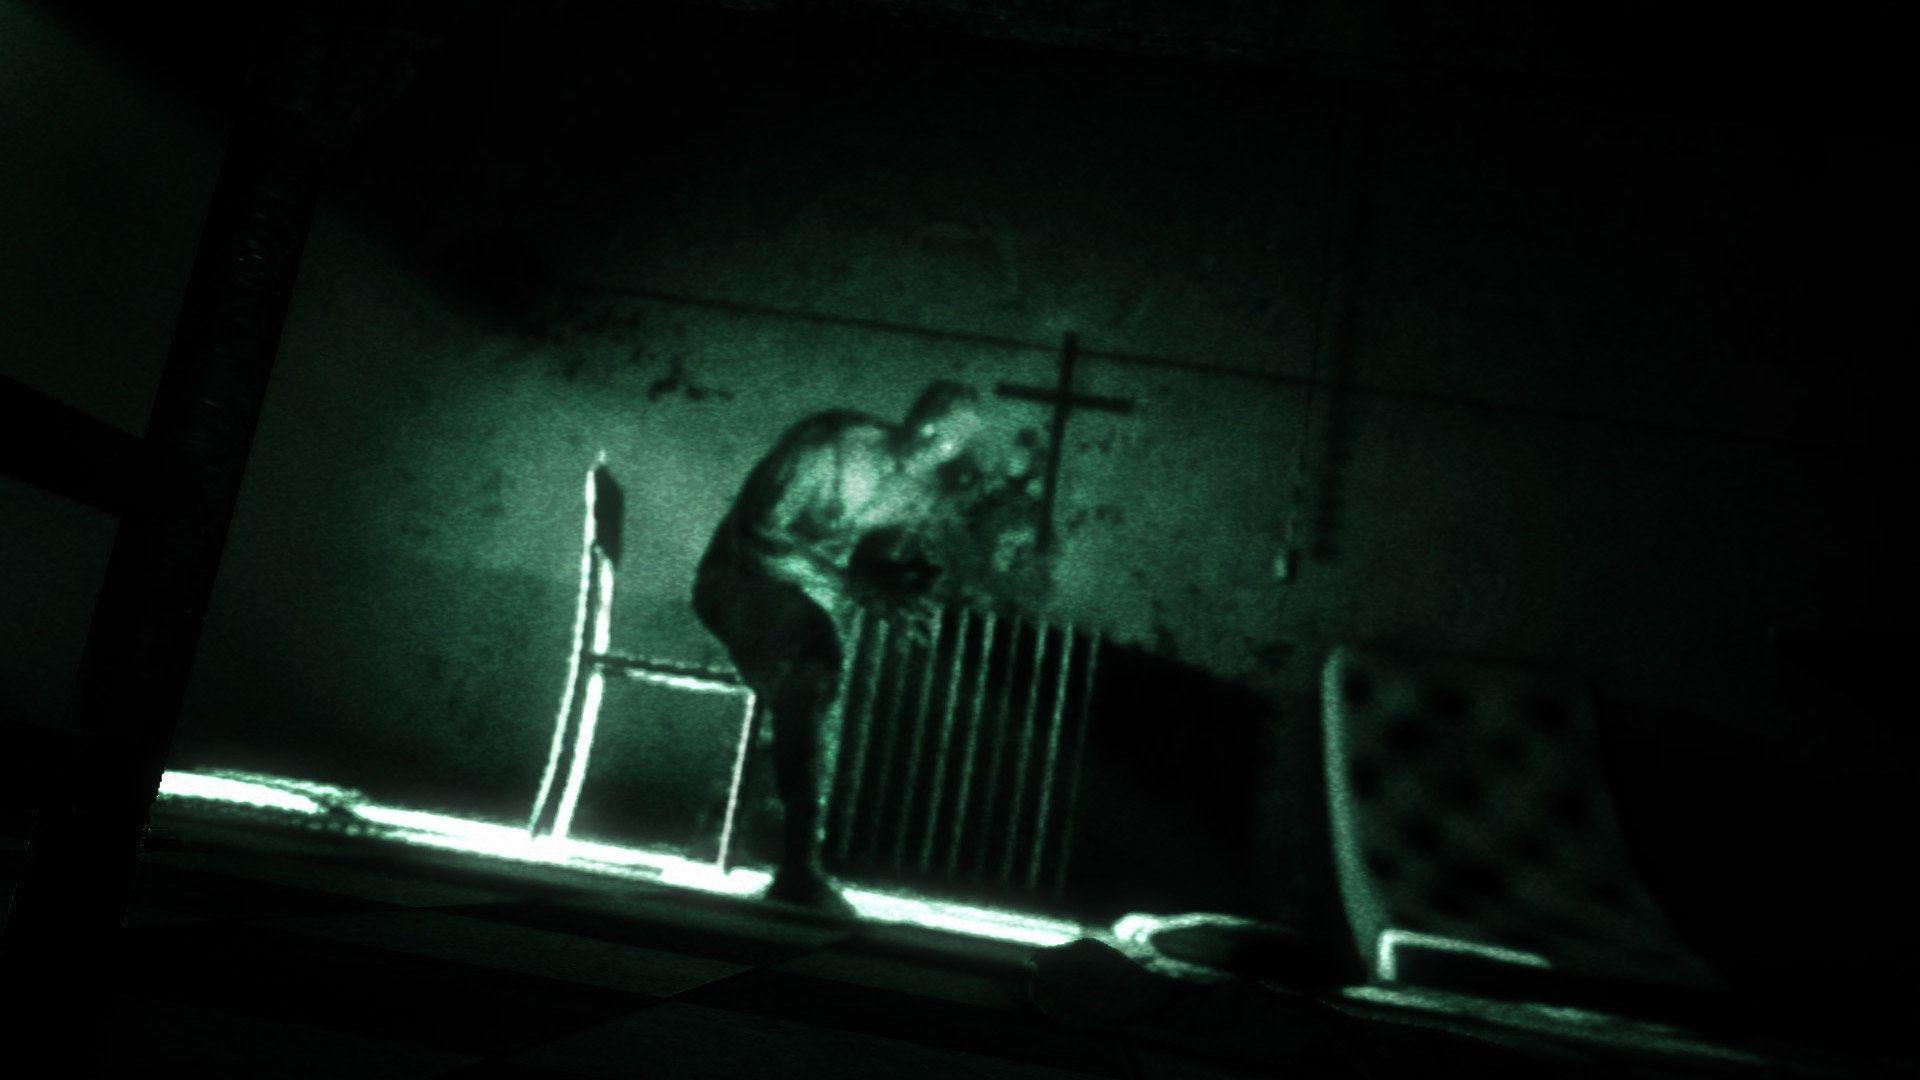 Outlast 1080P Wallpapers